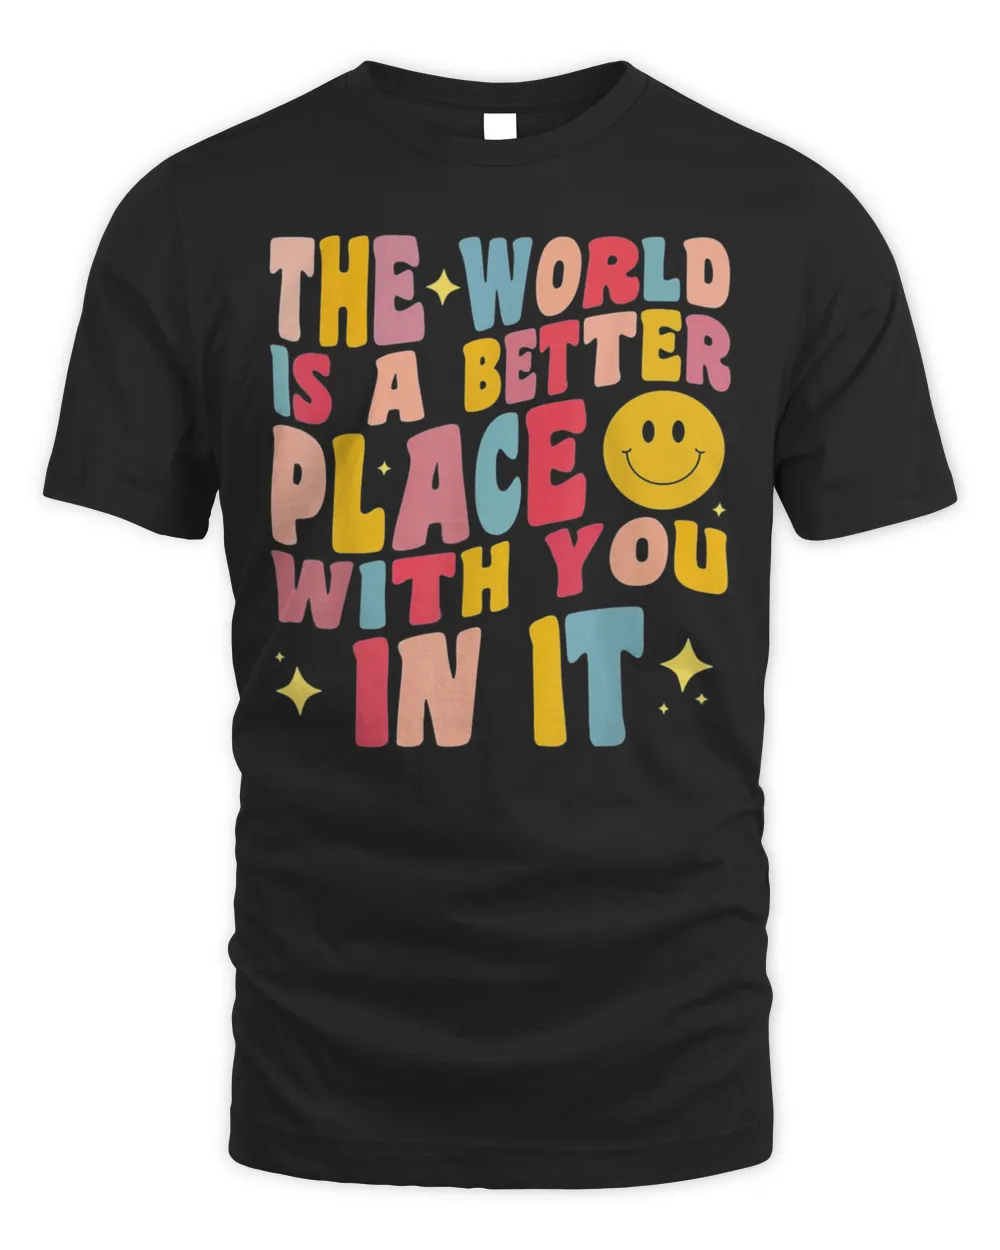 The World Is A Better Place With You In It Positive Motivate Shirt